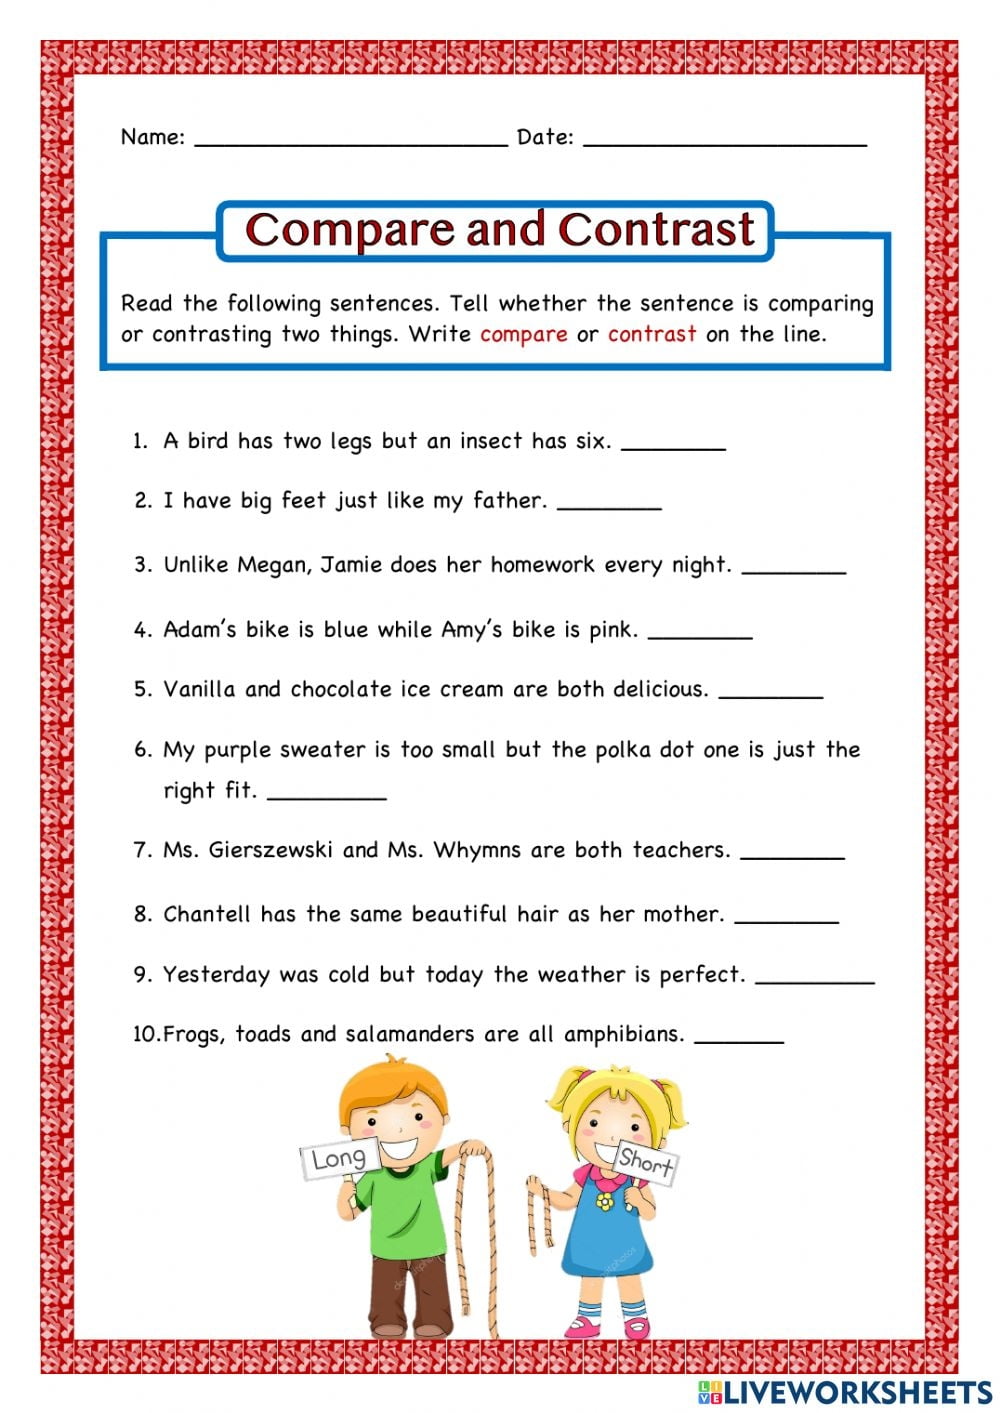 Compare And Contrast Free Online Exercise